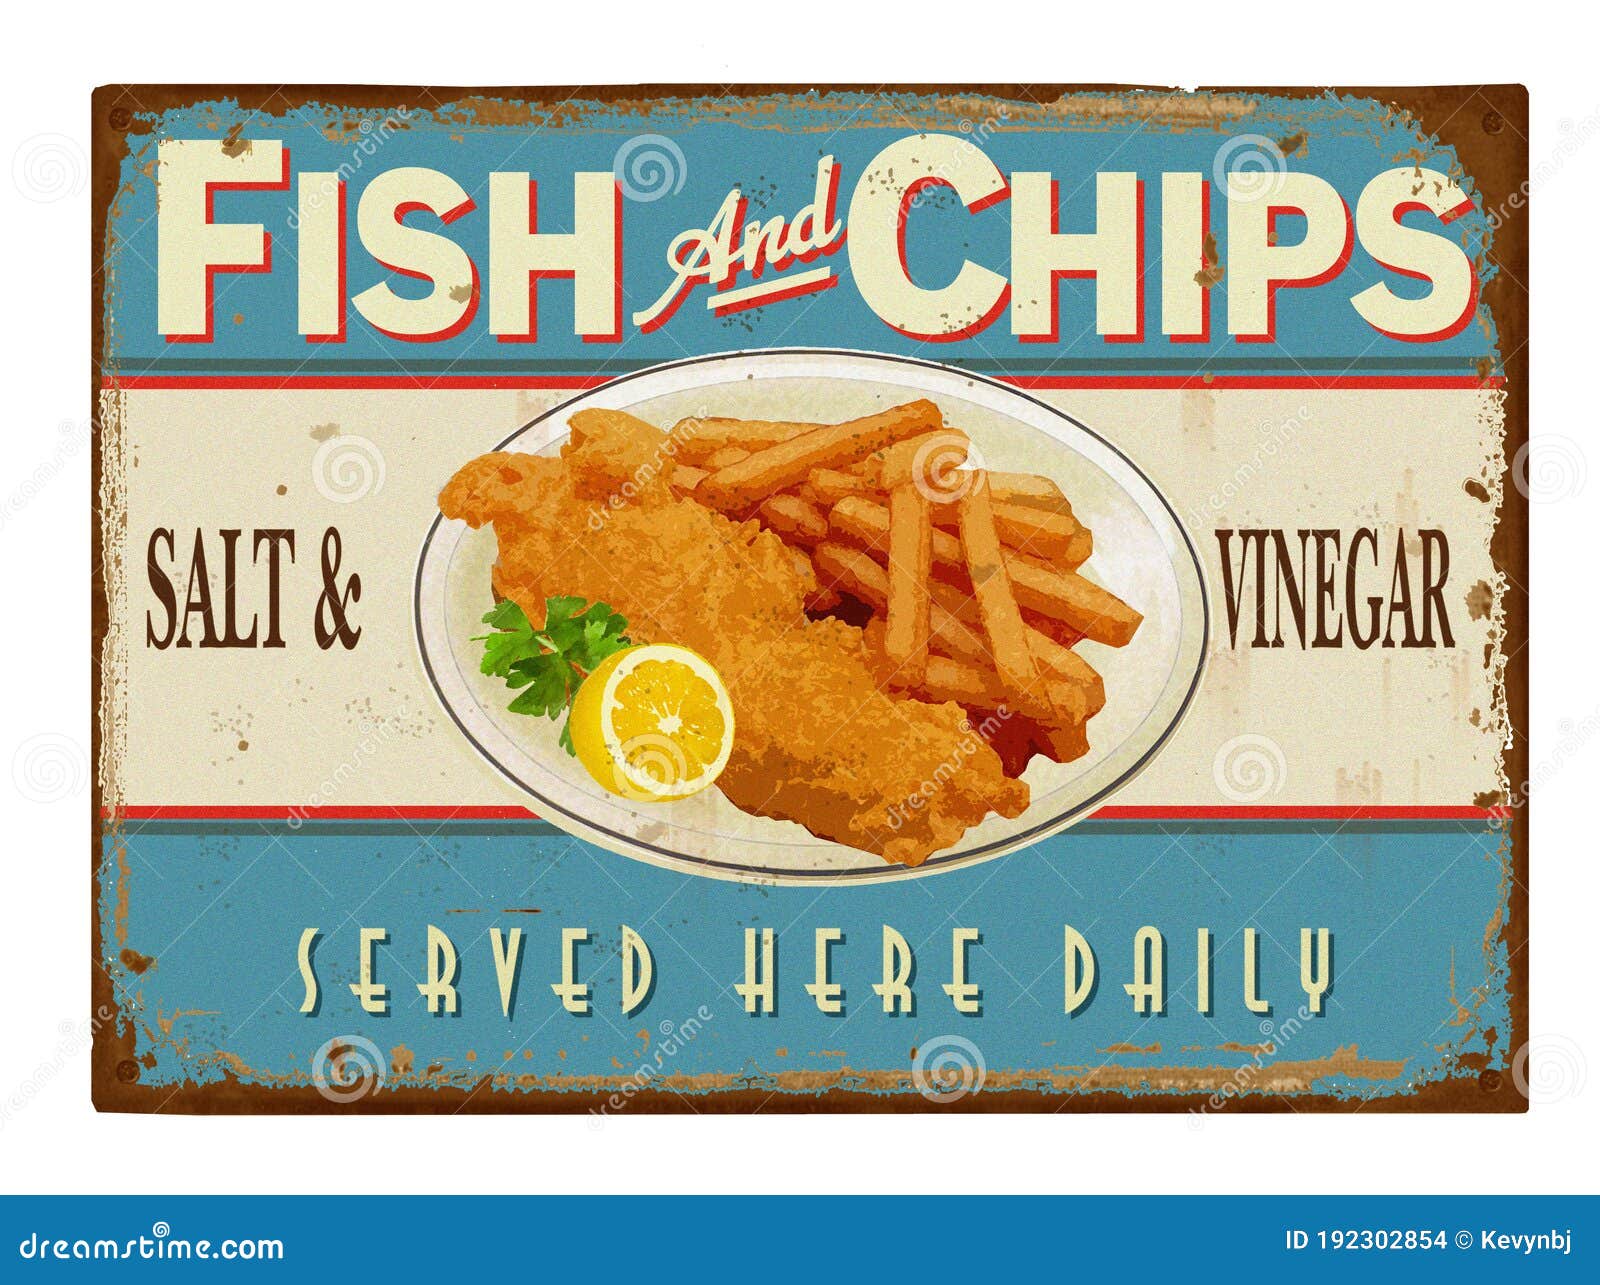 vintage fish and chips sign poster